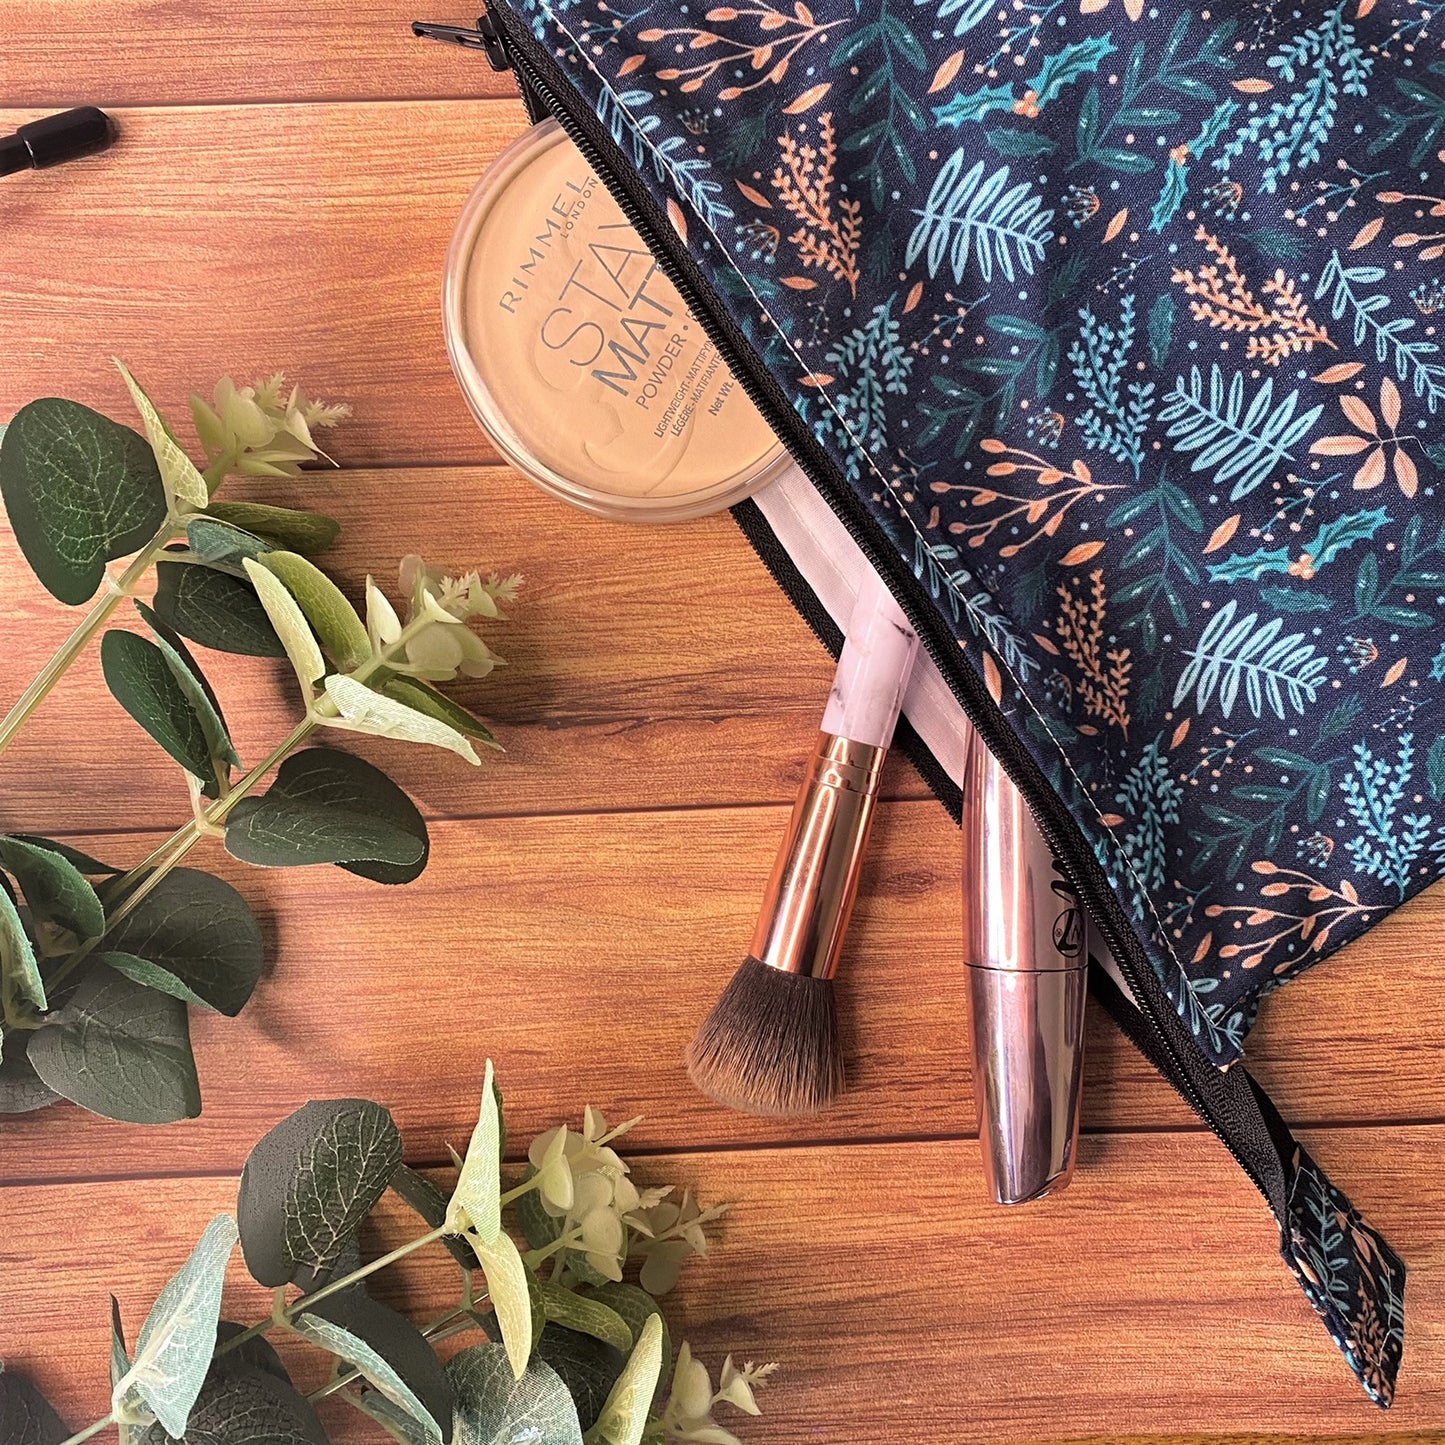 Closeup of the makeup bag with the dark foliage pattern and a makeup brush, mascara and a powder sticking out of the bag to show the size. It is sat on a wooden background near some green foliage